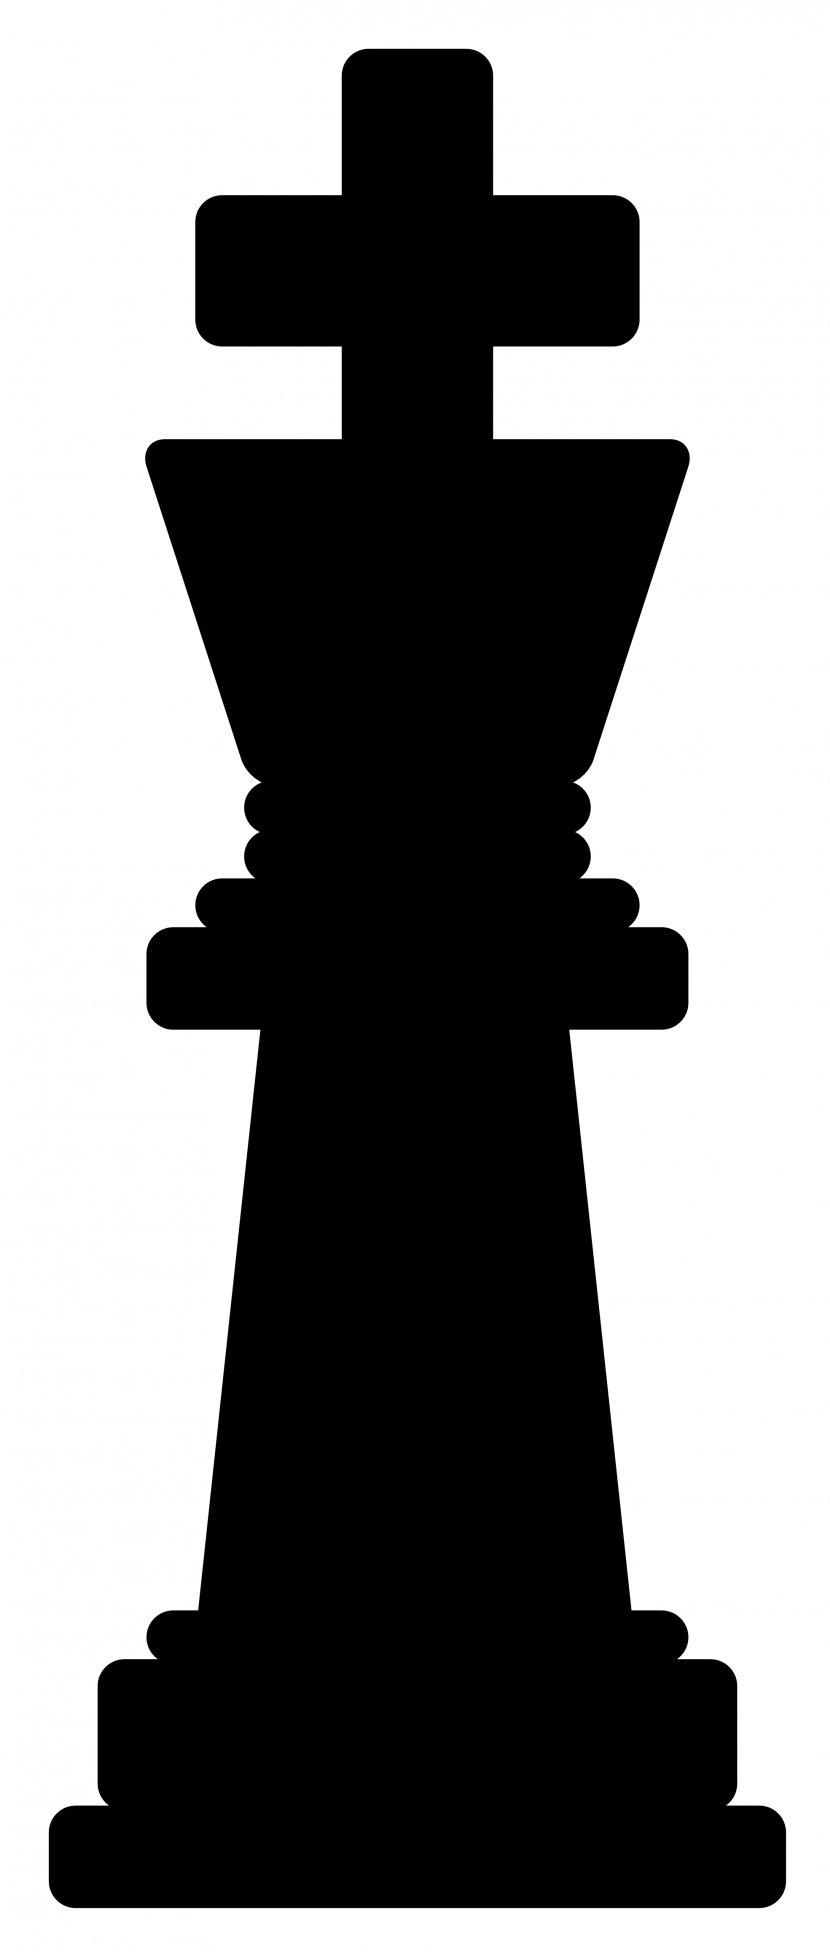 Chess Piece King Queen Clip Art - White And Black In - Knight Cliparts Transparent PNG